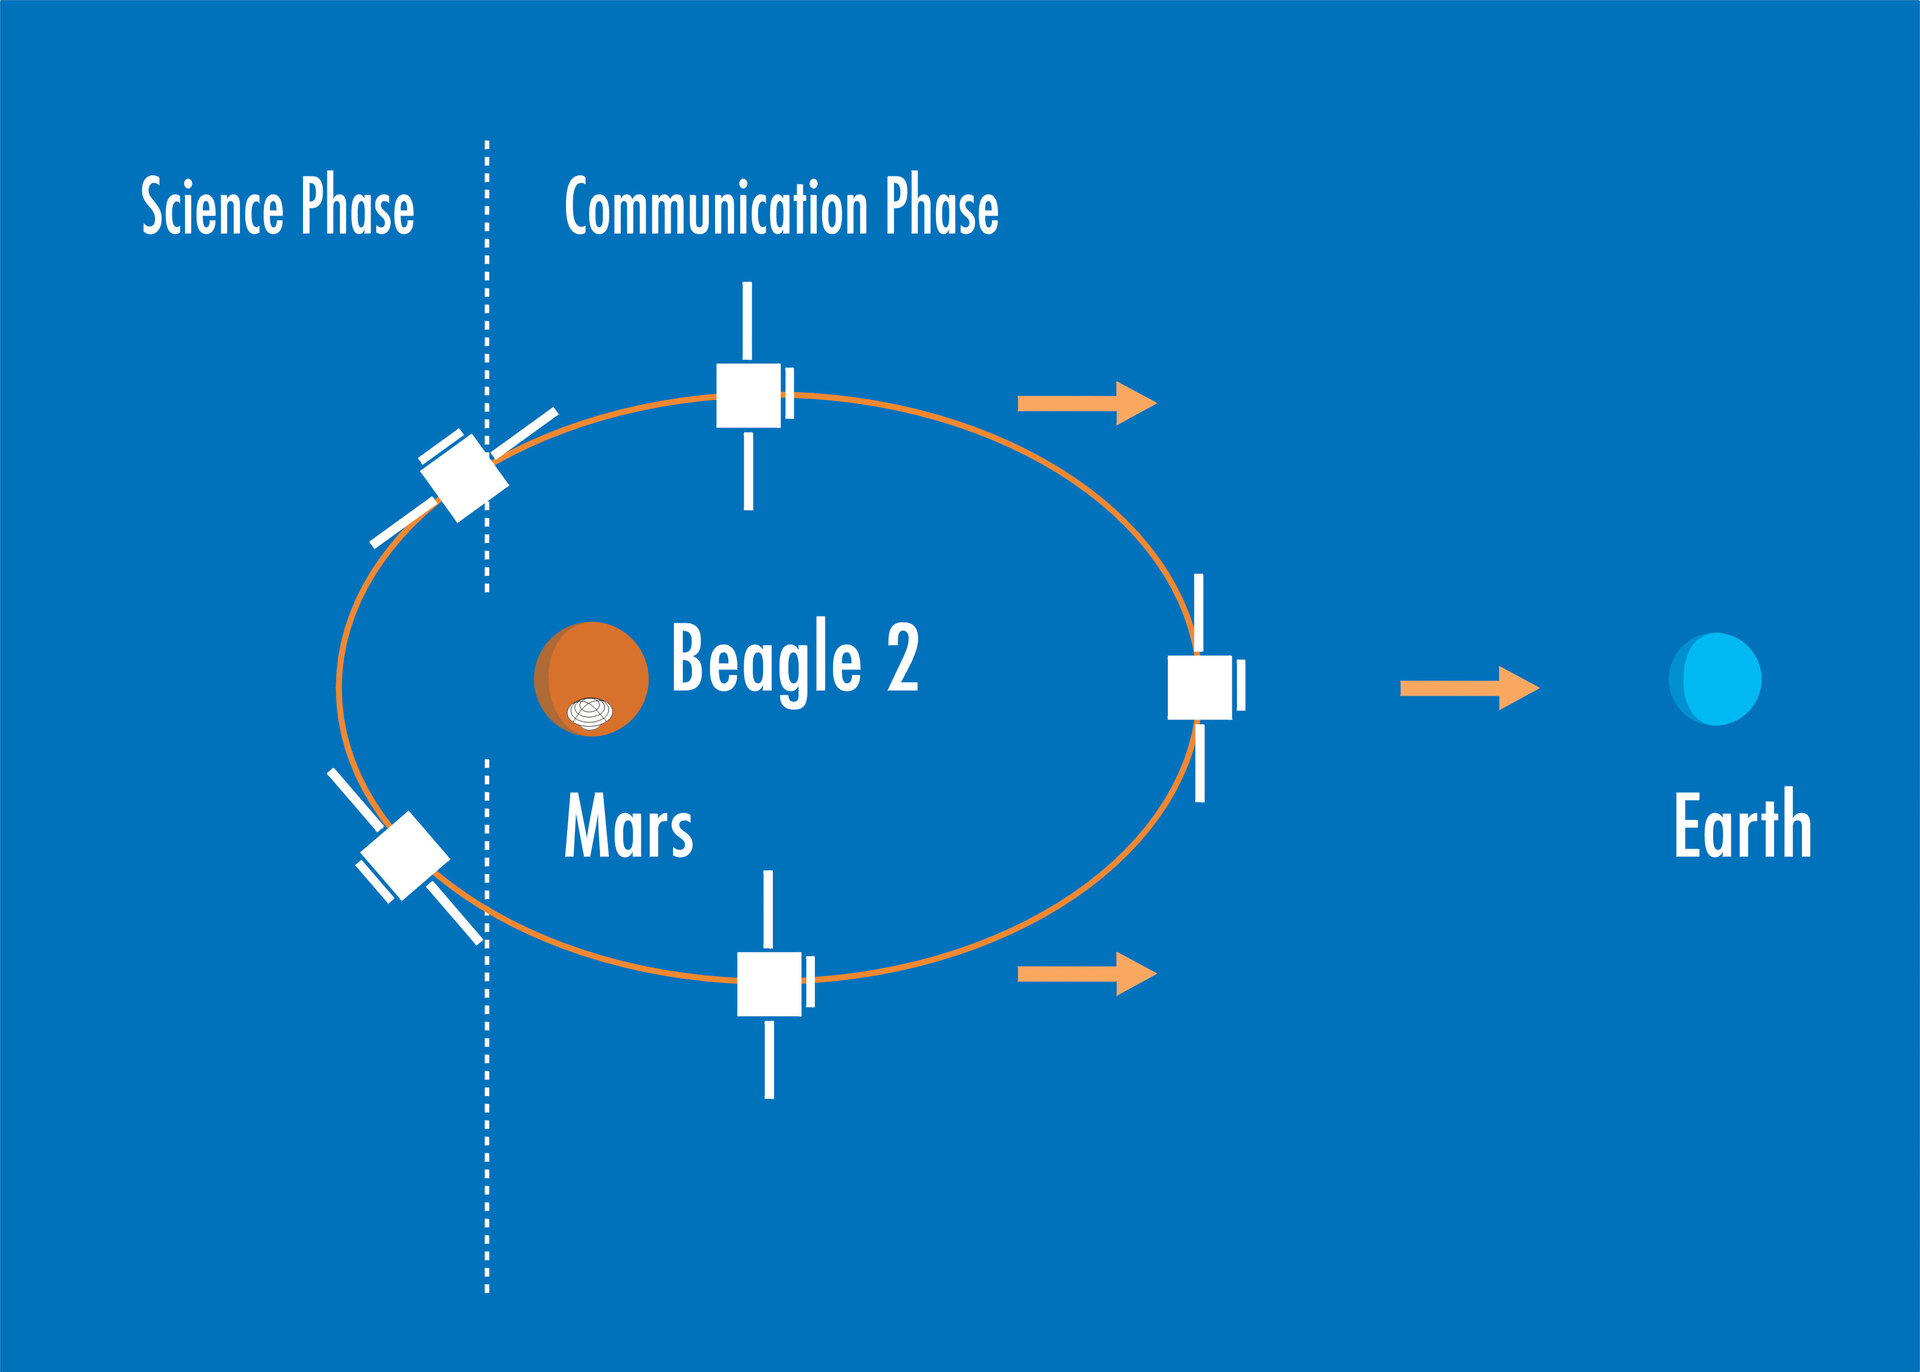 The Mars Express science and communication phases with the ground station on Earth